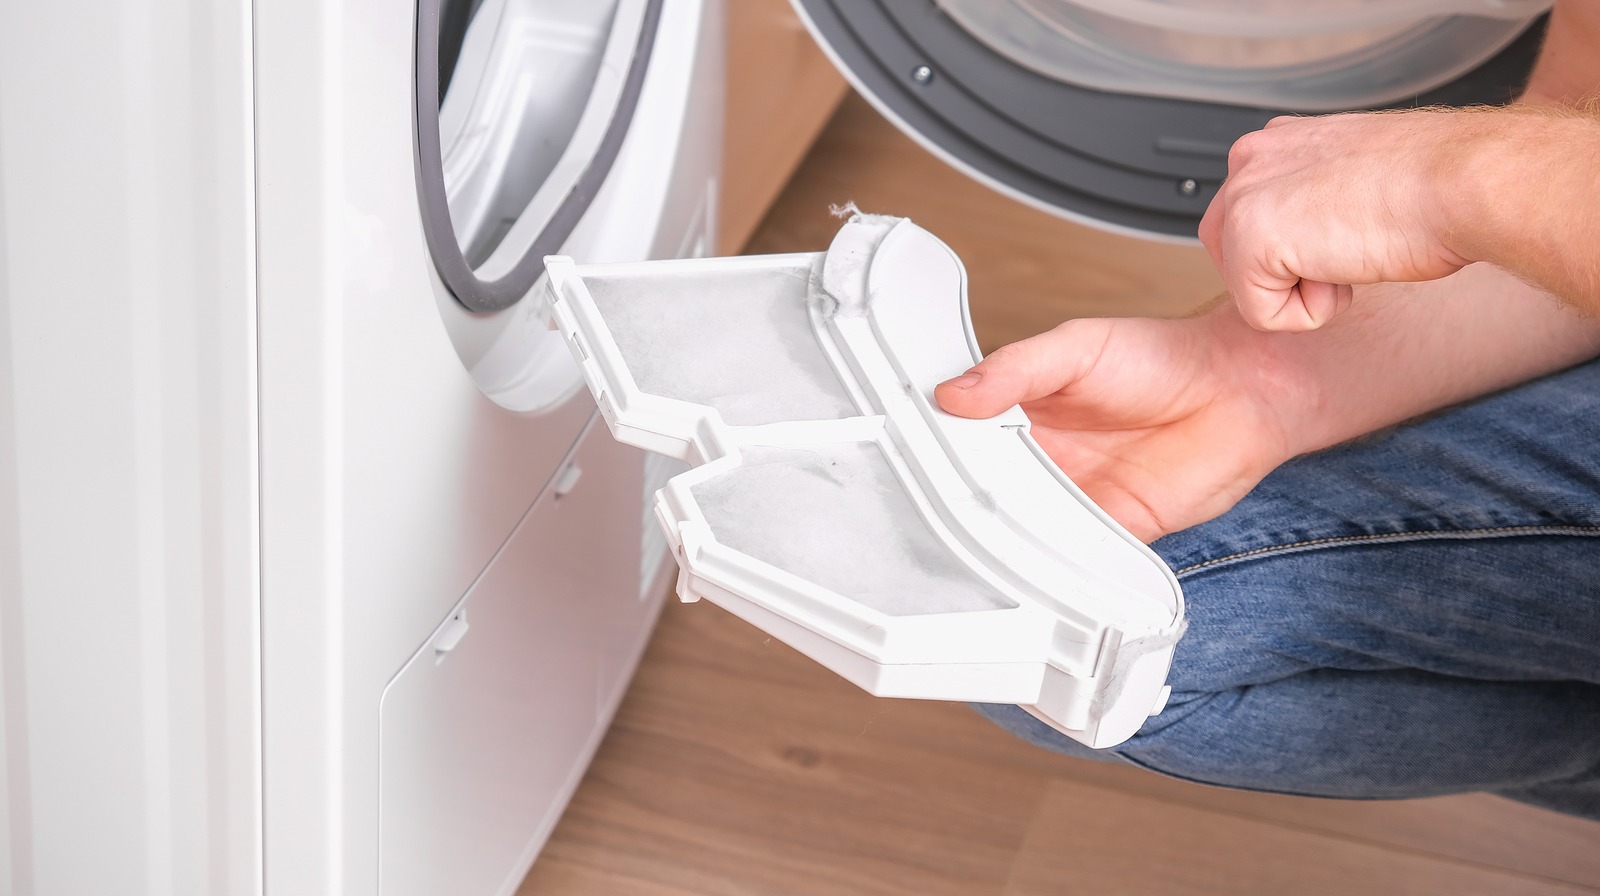 The Easiest Way To Clean Your Dryer’s Lint Trap Involves A Trip To The Paint Store – House Digest